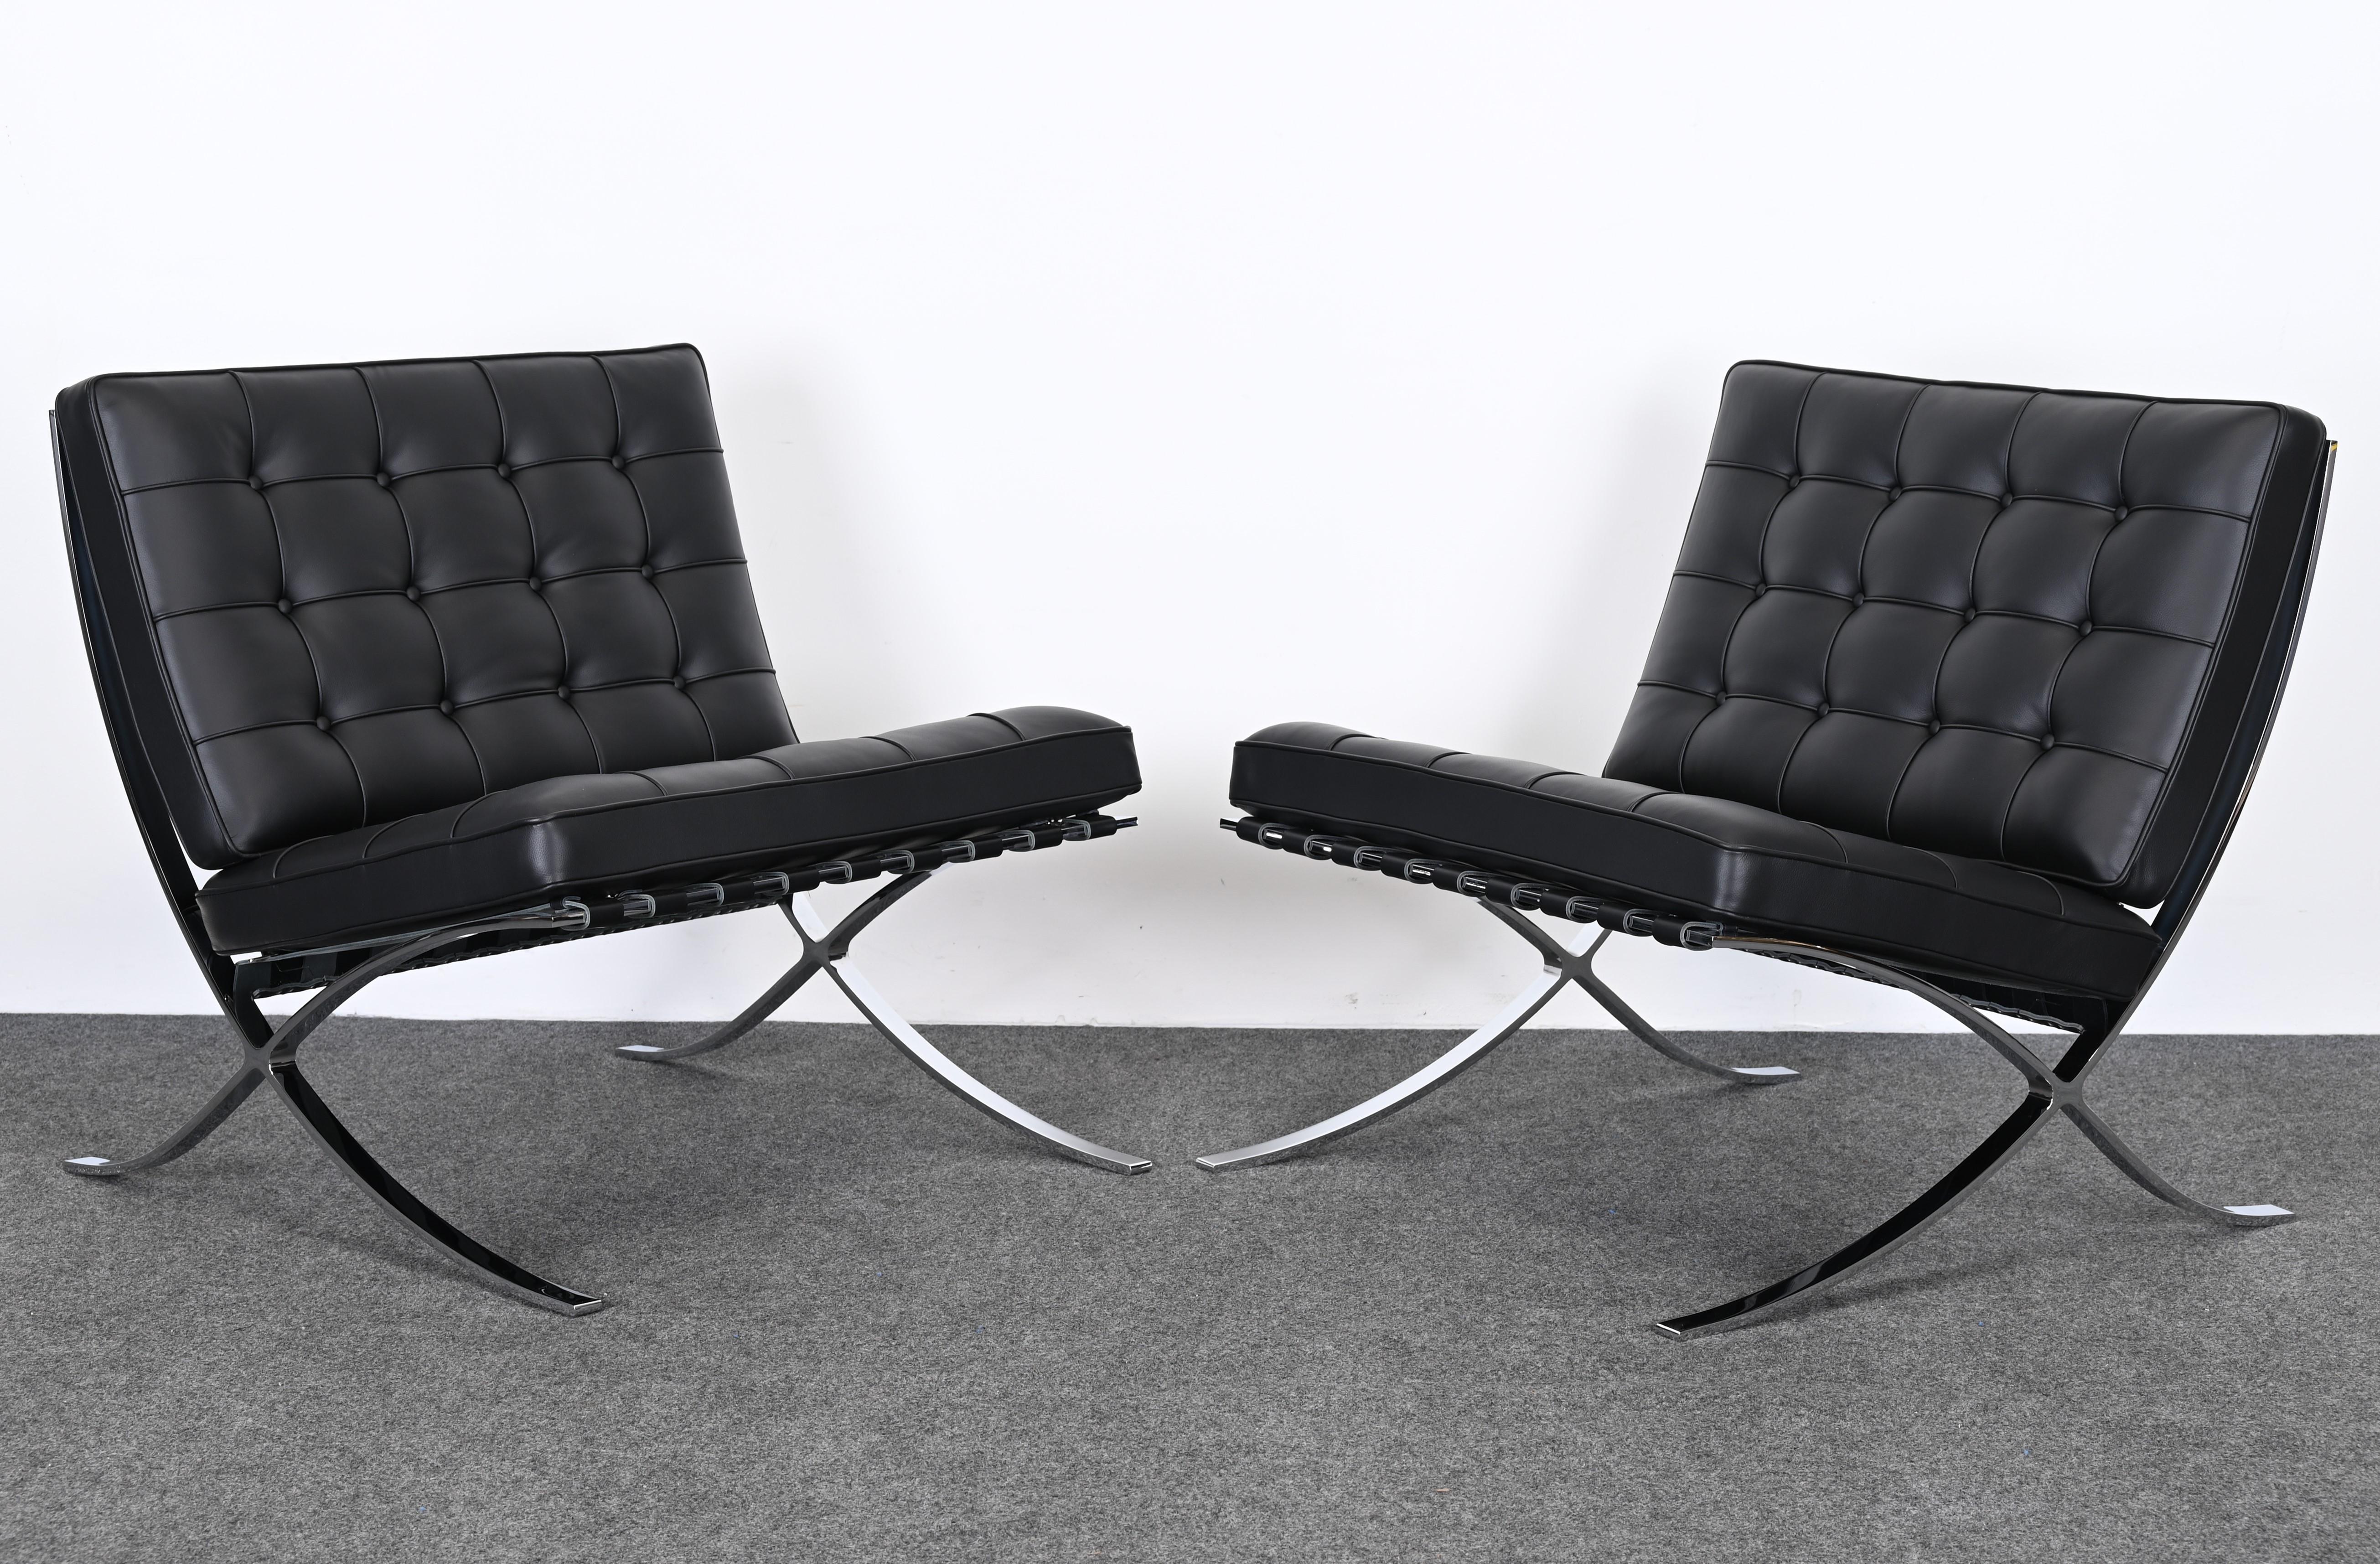 A luxurious pair of Mies van der Rohe Barcelona chairs for Knoll Studio. This actual pair came via a Knoll employee direct from the factory and was recently manufactured. They are in excellent condition and are ready to place. The pair sells on